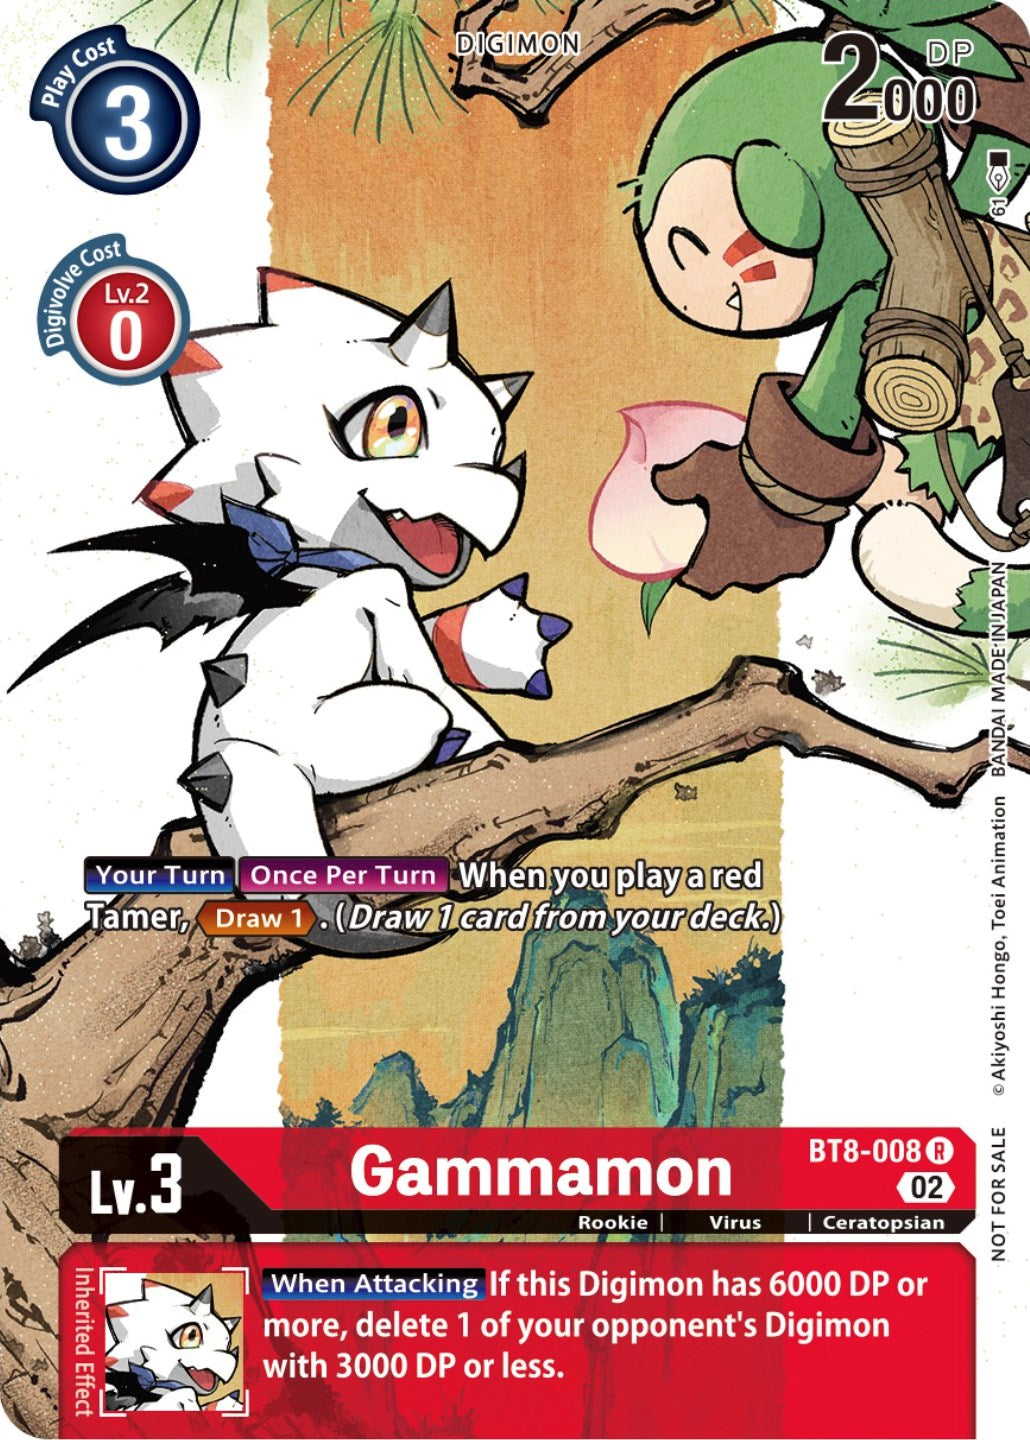 Gammamon [BT8-008] (Digimon Illustration Competition Promotion Pack) [New Awakening Promos] | Total Play